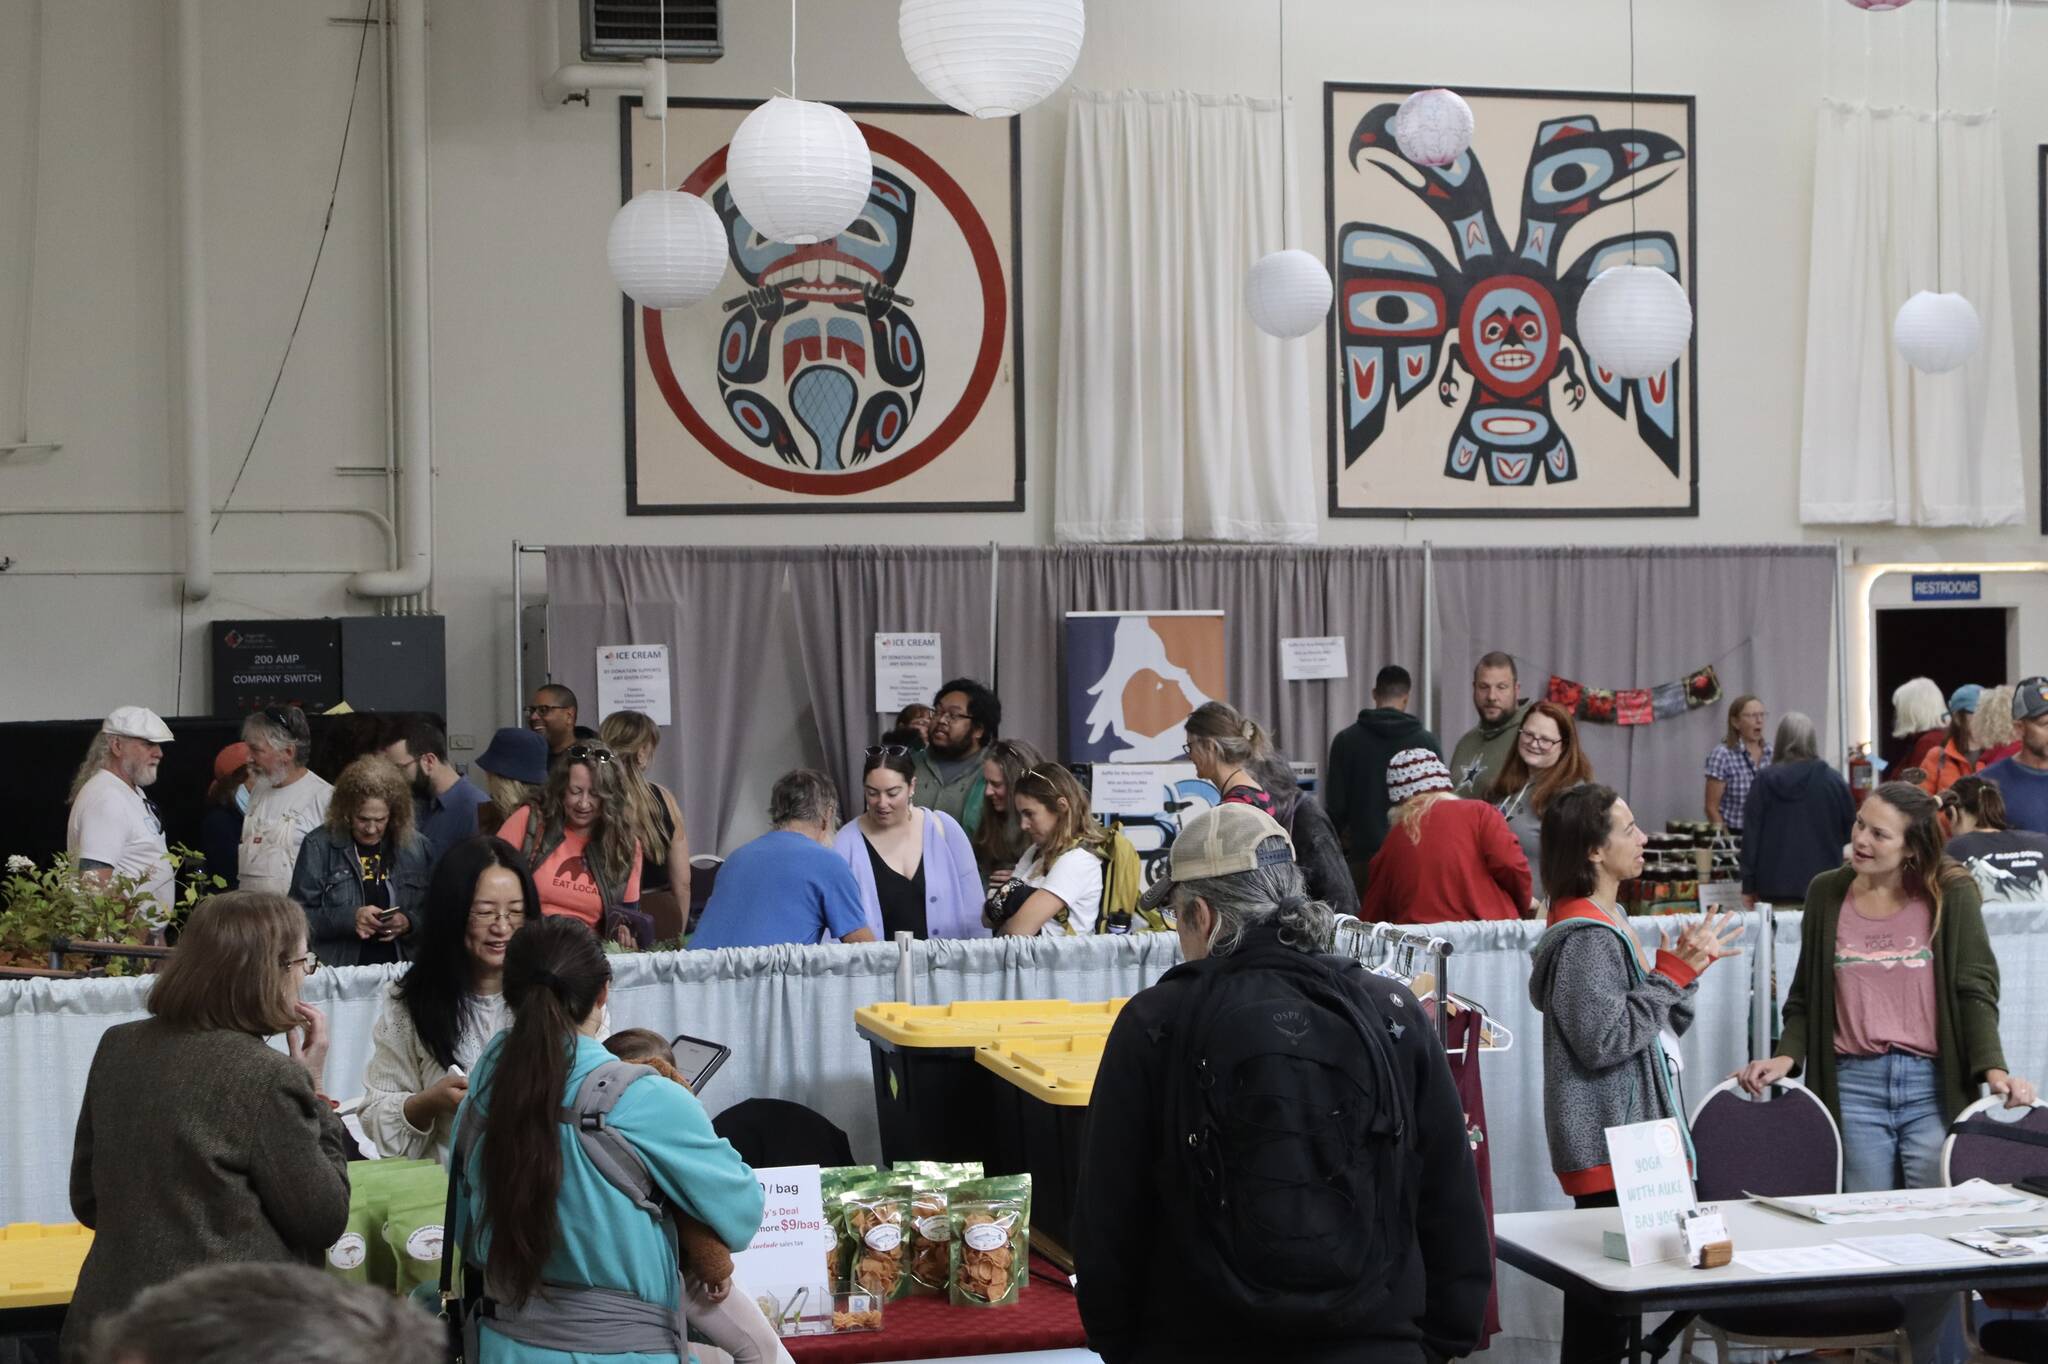 Food and other items are offered to people inside the Juneau Arts & Culture Center during the Annual Food Festival & Farmer’s Market on Saturday. (Meredith Jordan / Juneau Empire)